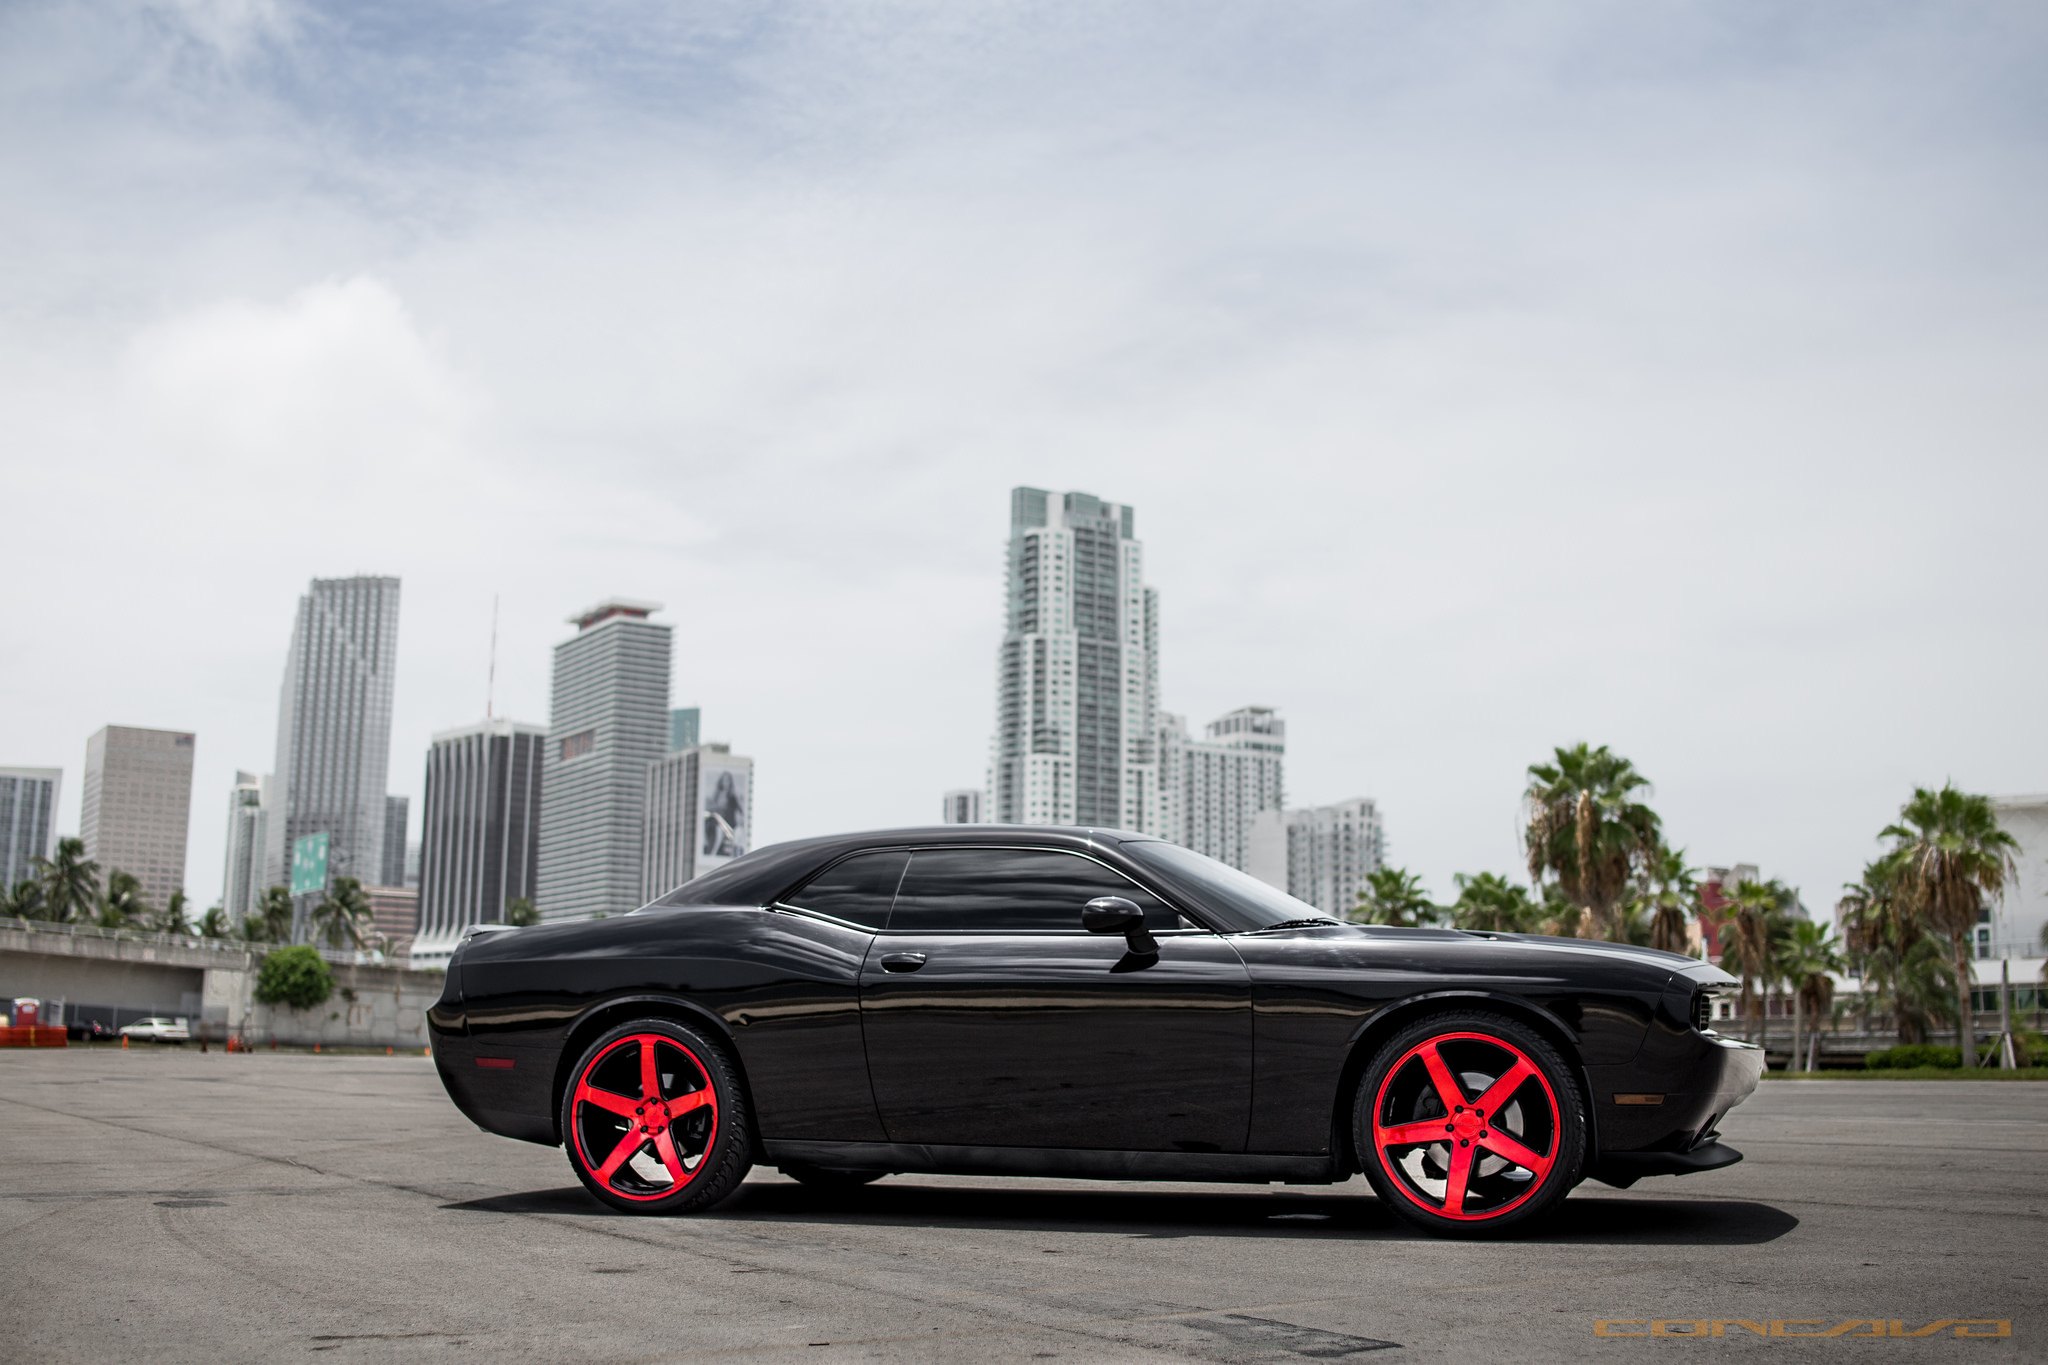 Black Window Tint on Dodge Challenger - Photo by Concav